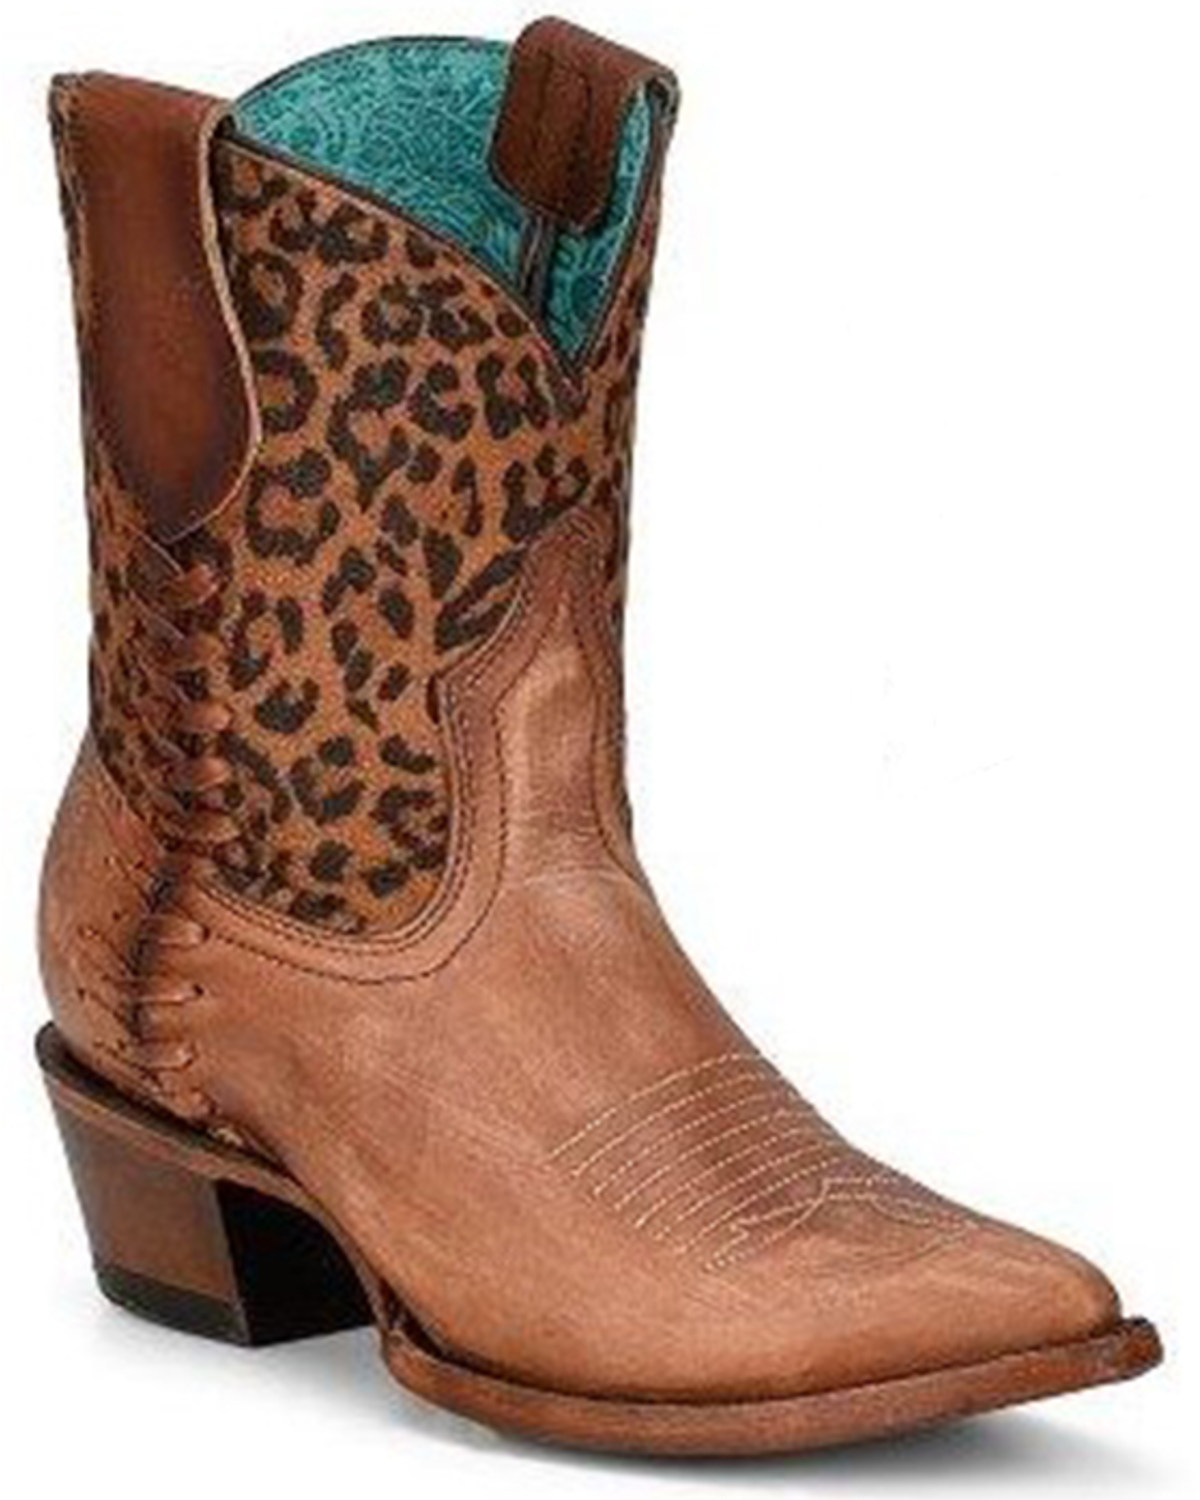 Corral Women's Leopard Print Western Booties - Pointed Toe